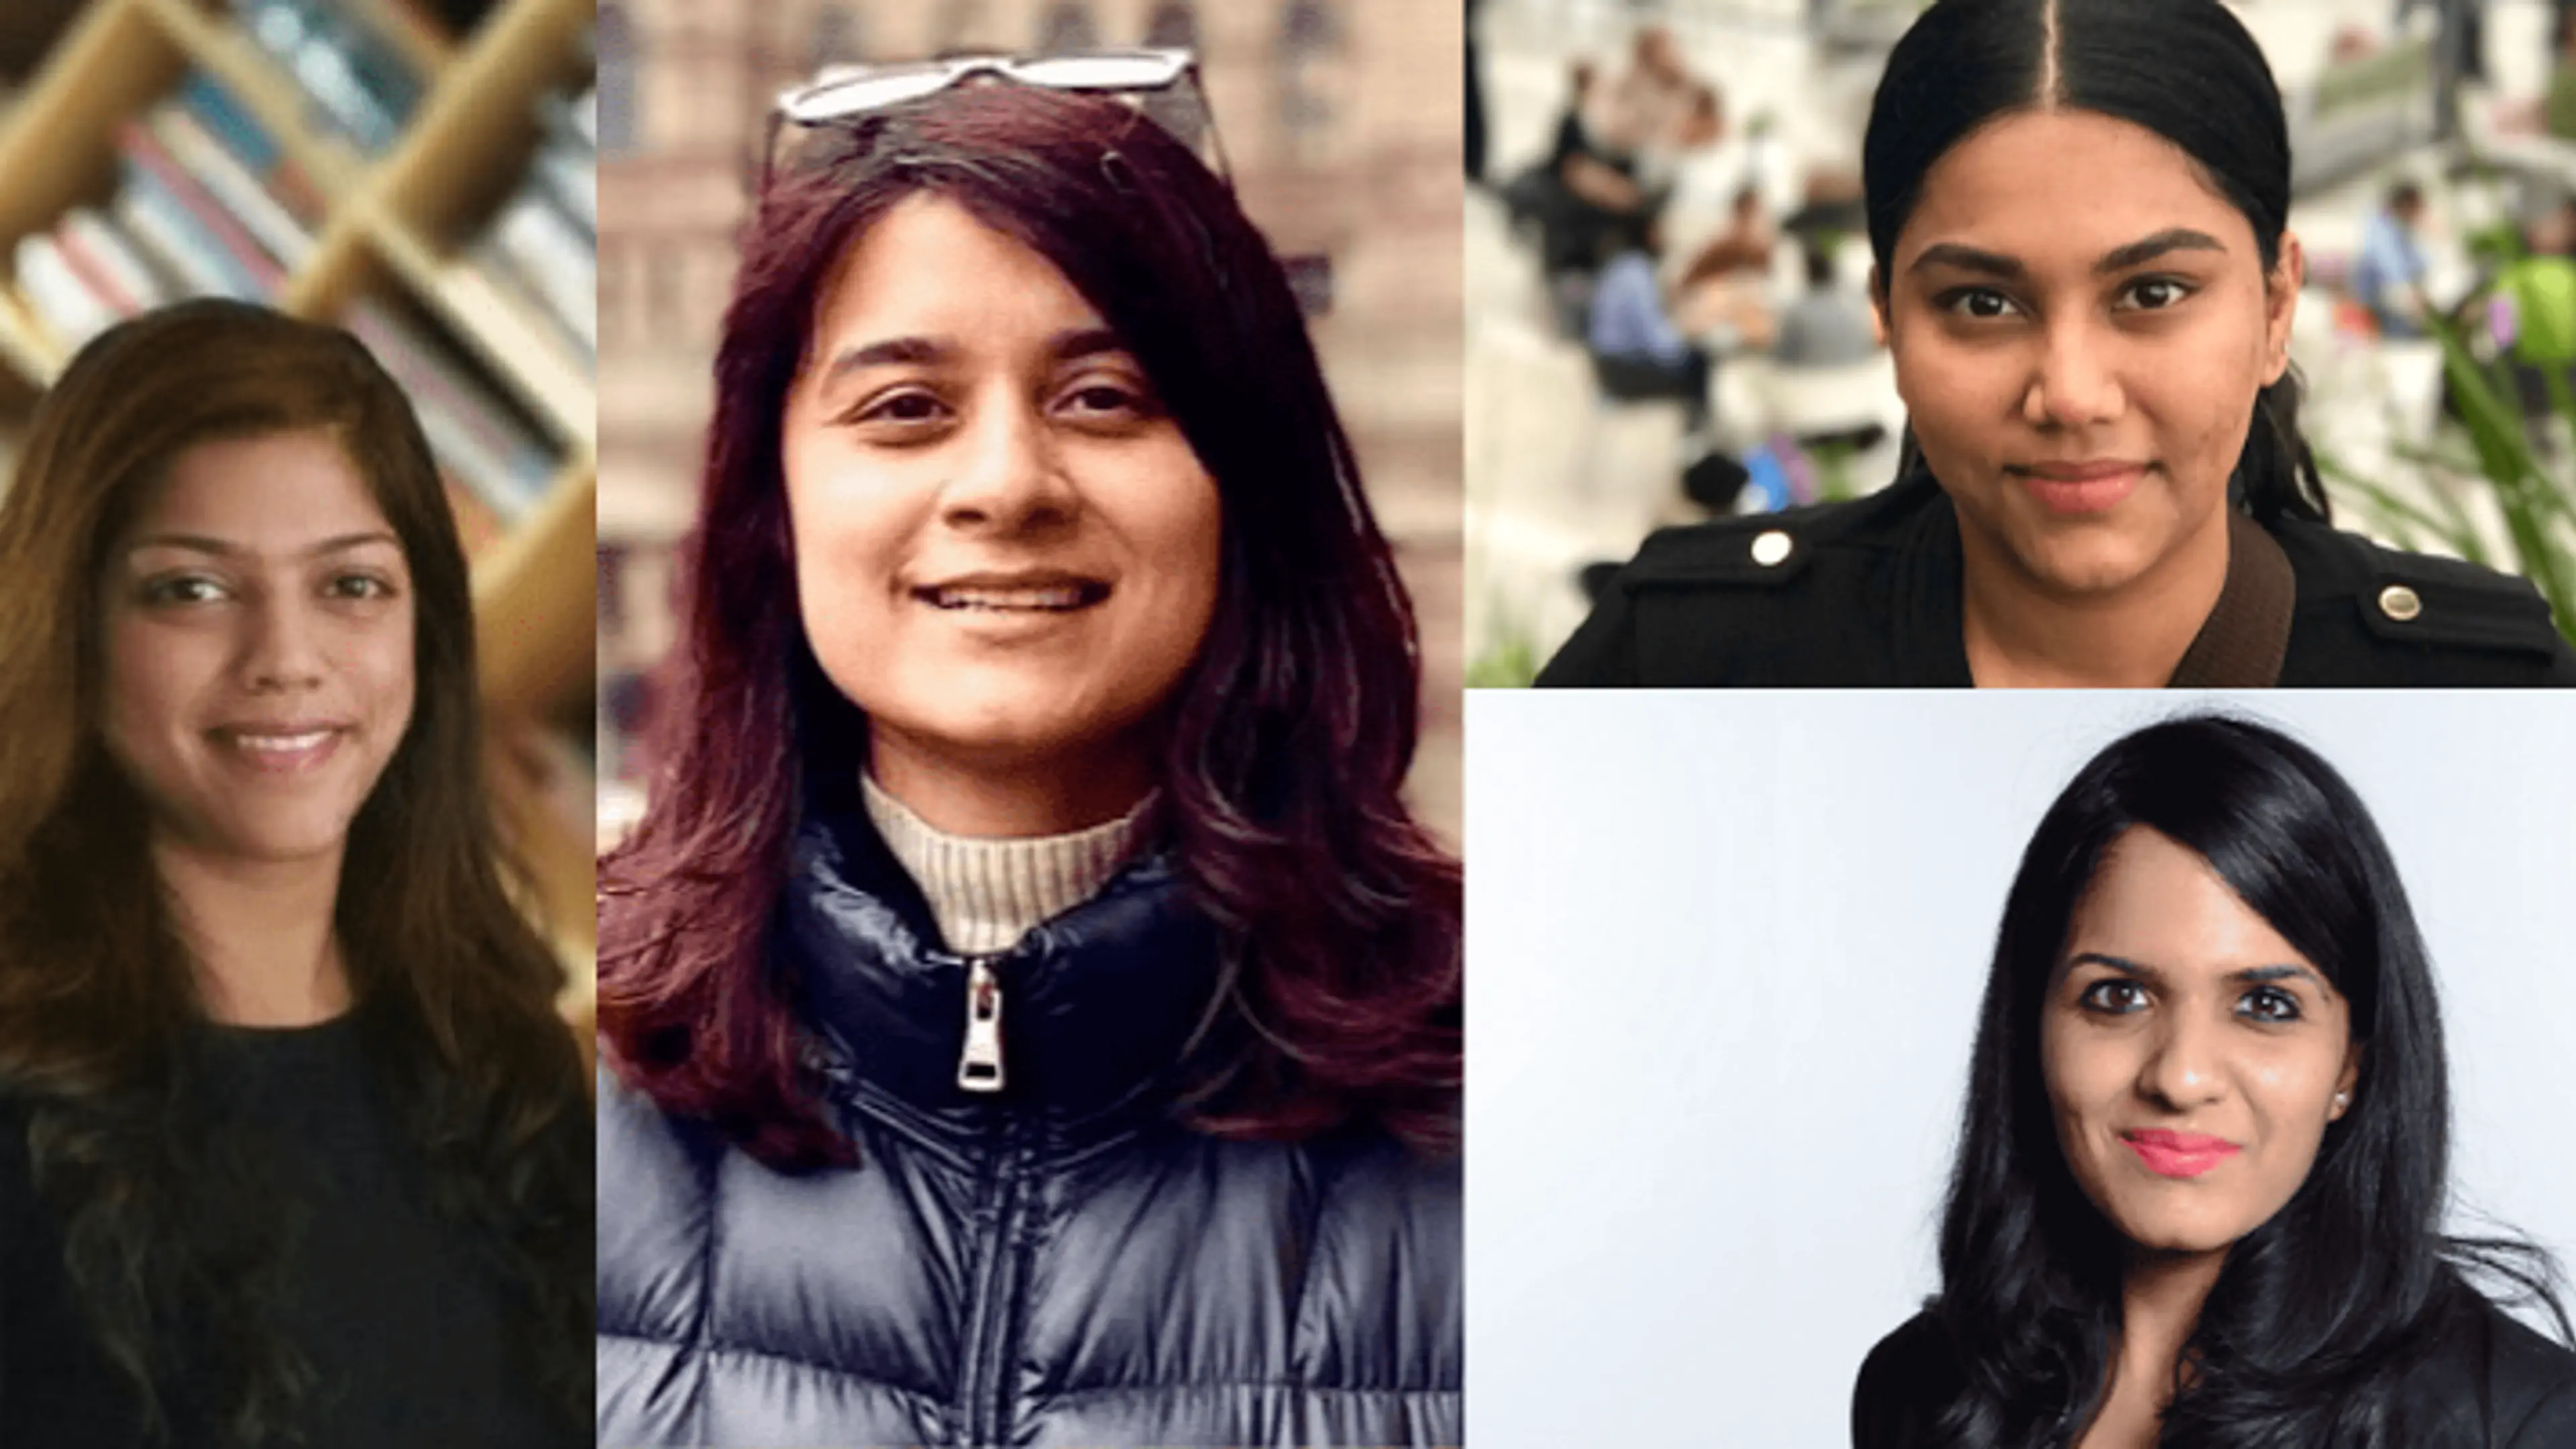 Meet 4 women entrepreneurs who have built SaaS platforms to address various issues 